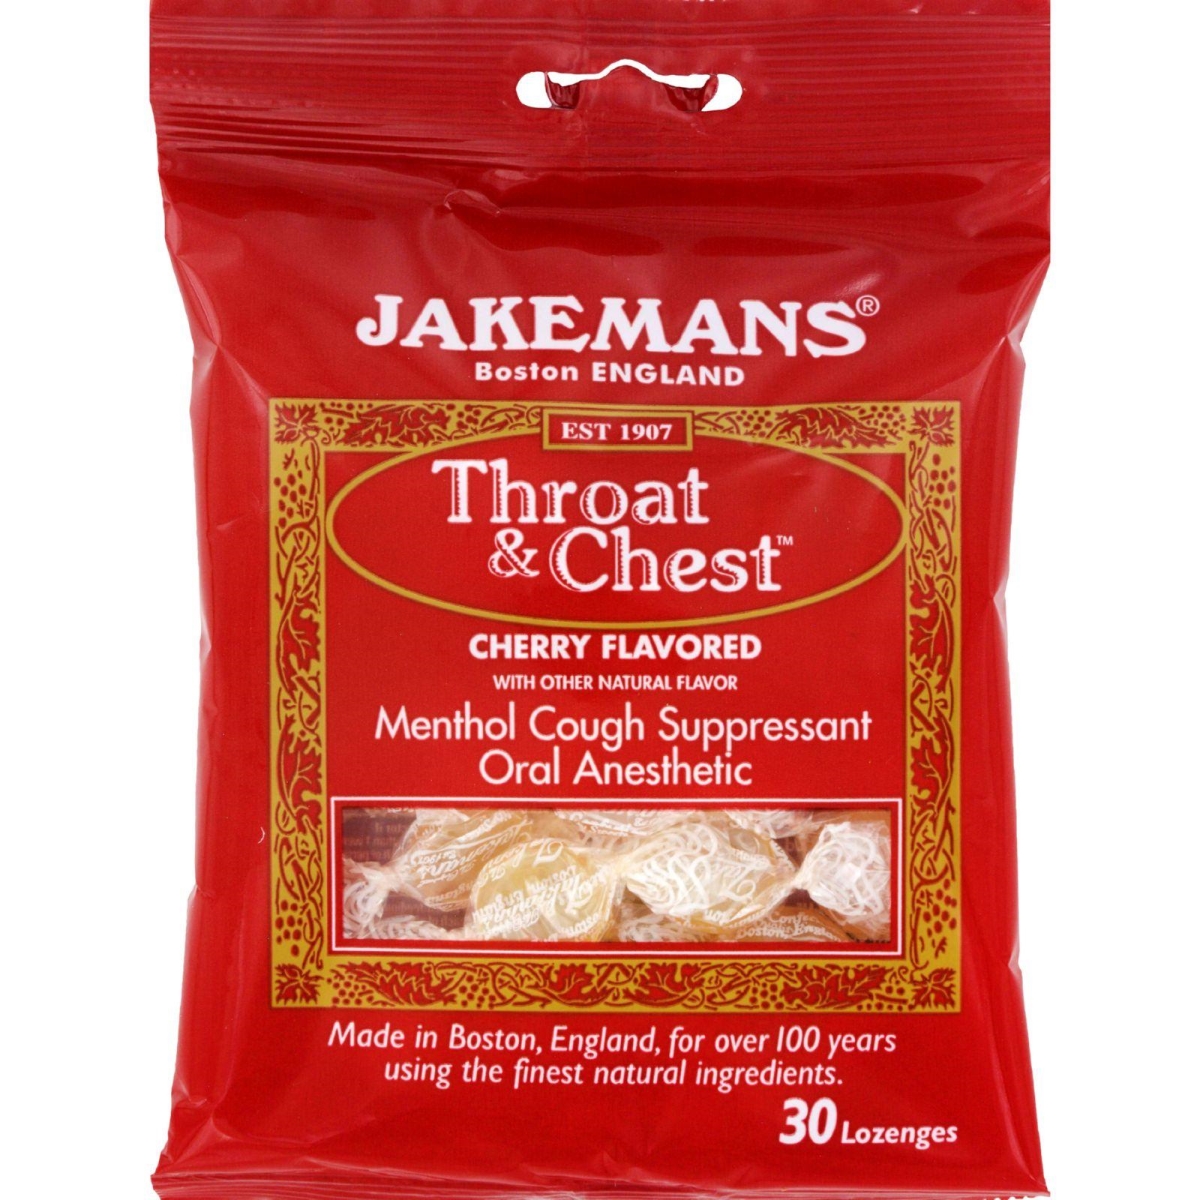 Hg0965491 Throat & Chest Lozenges, Cherry - Case Of 12, Pack Of 30